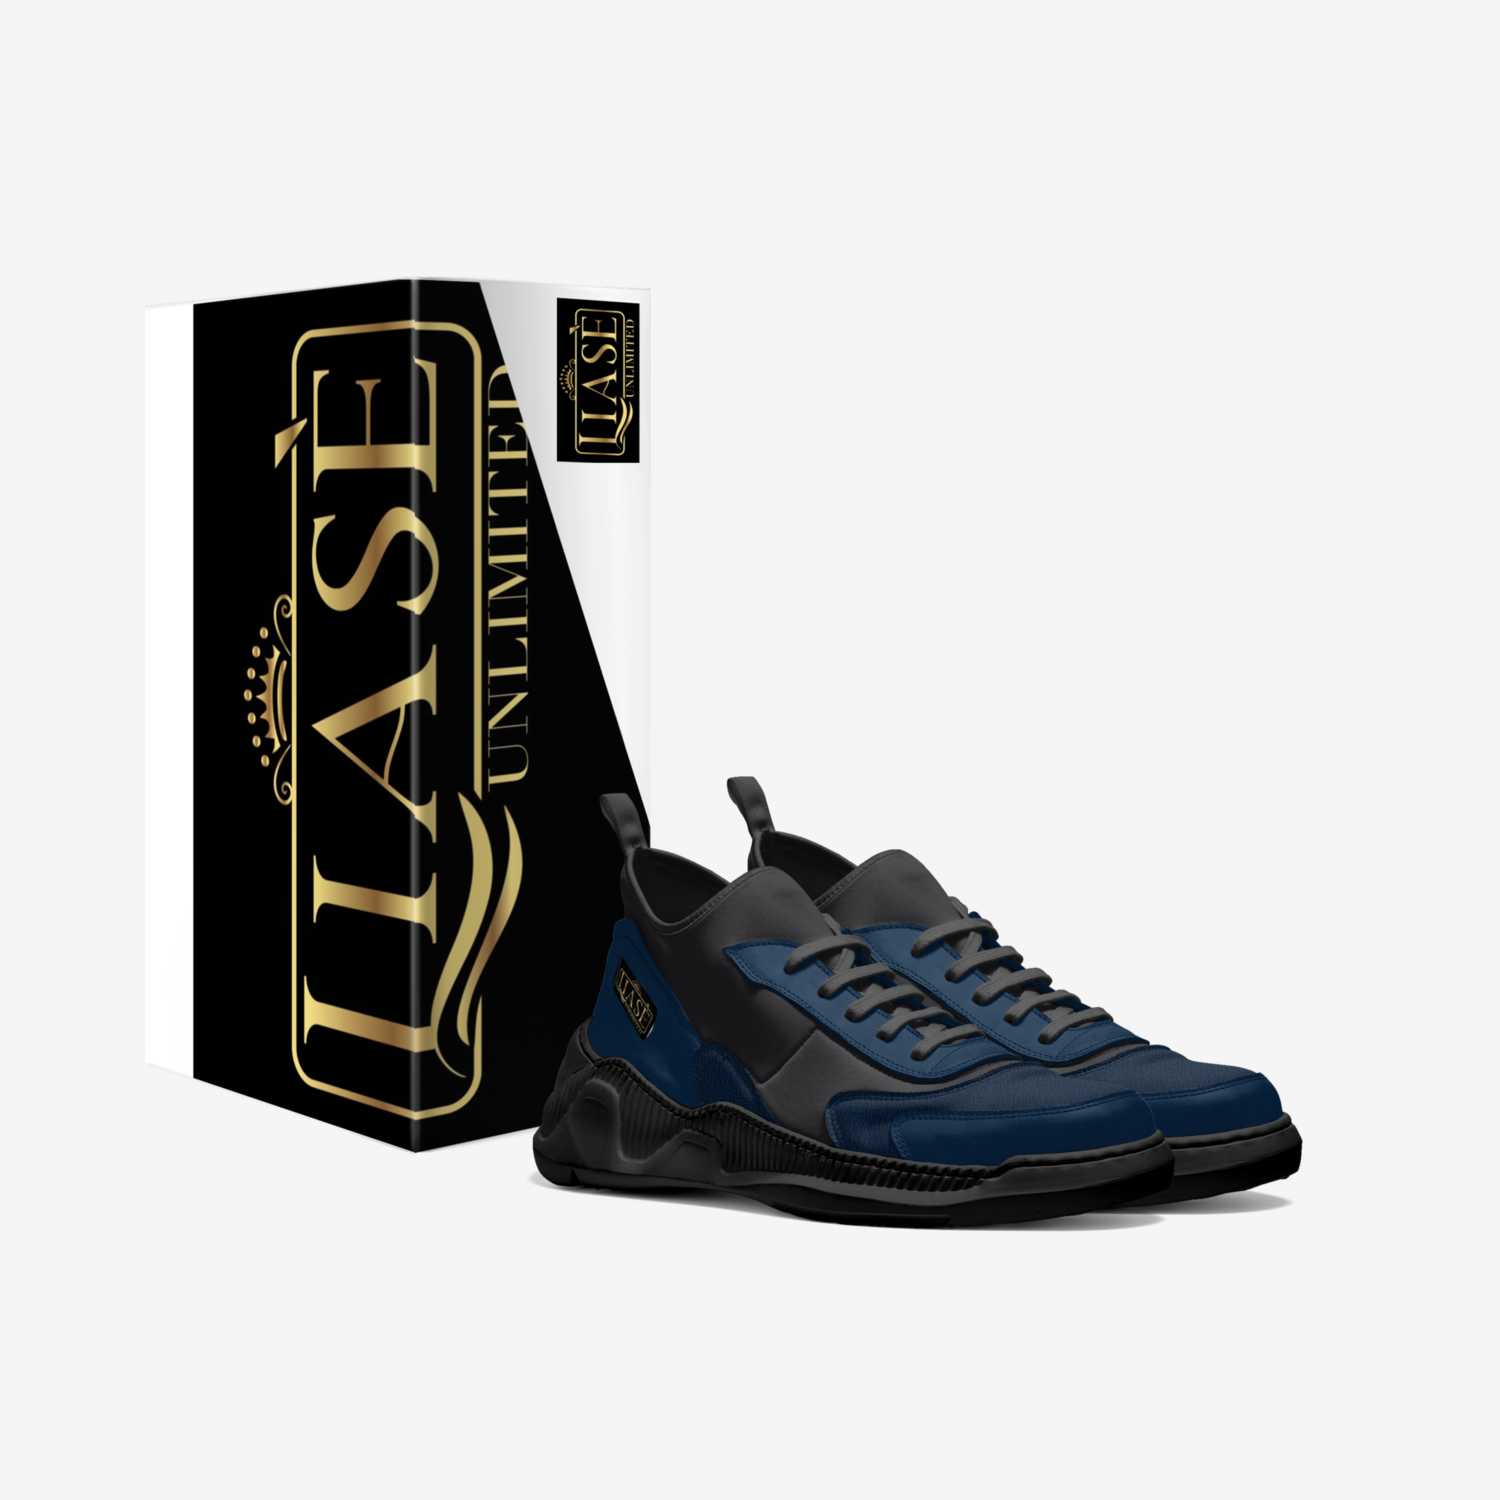 Liasè Collection custom made in Italy shoes by Wallace Douglas | Box view